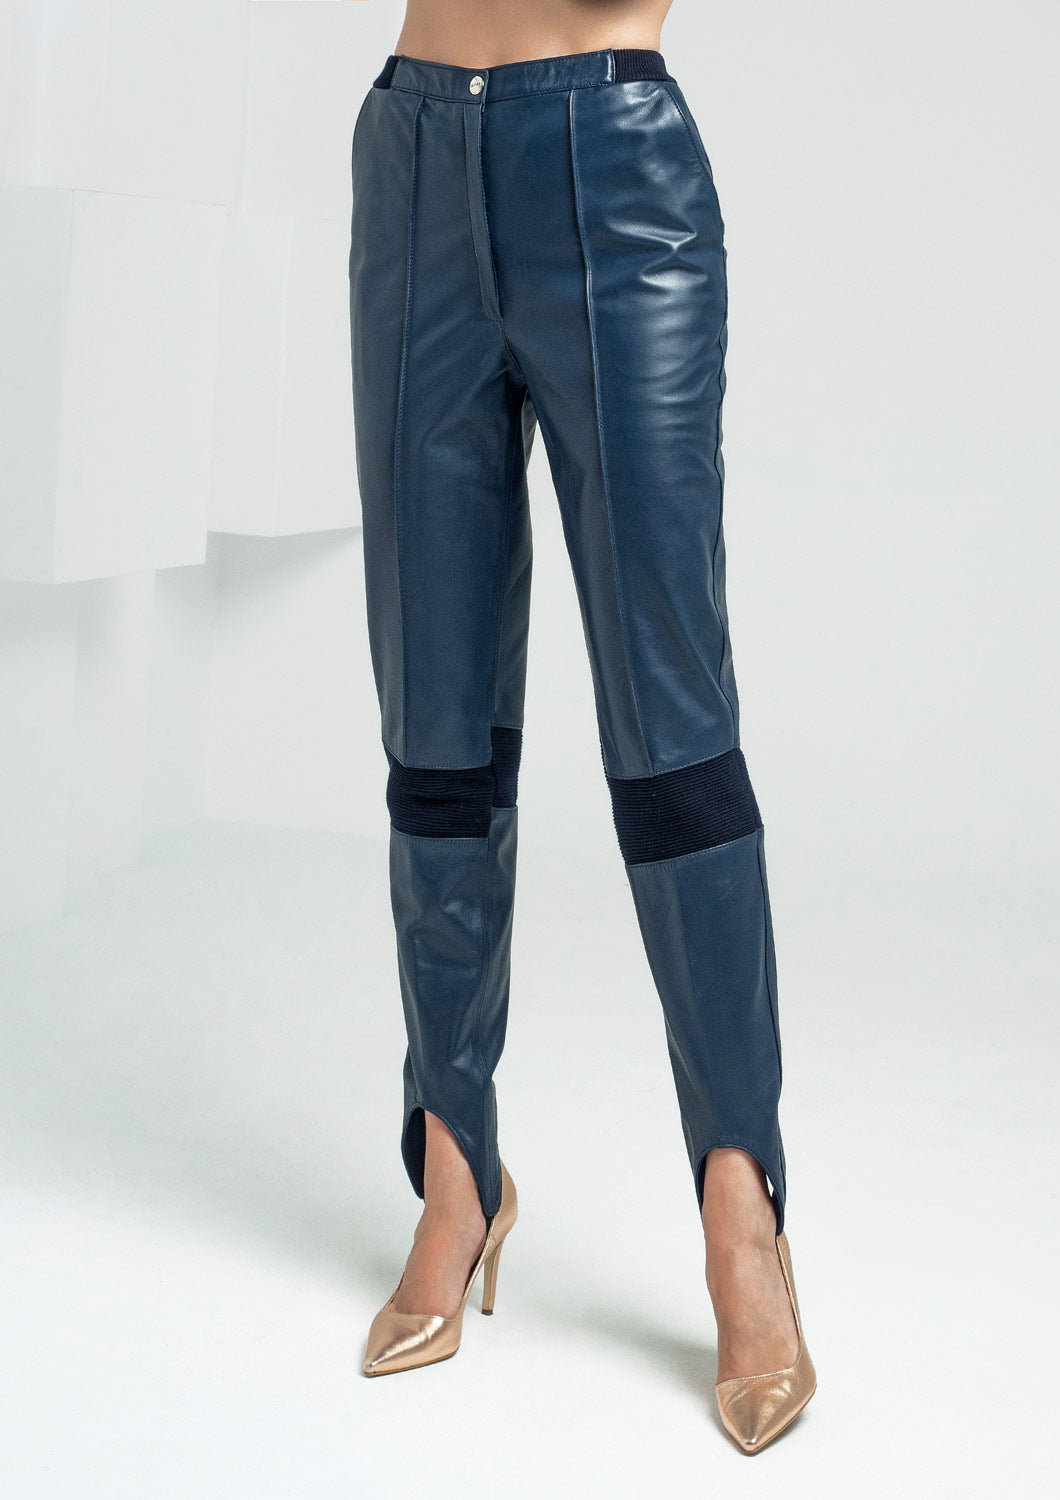 High-waisted trousers with bands under the legs